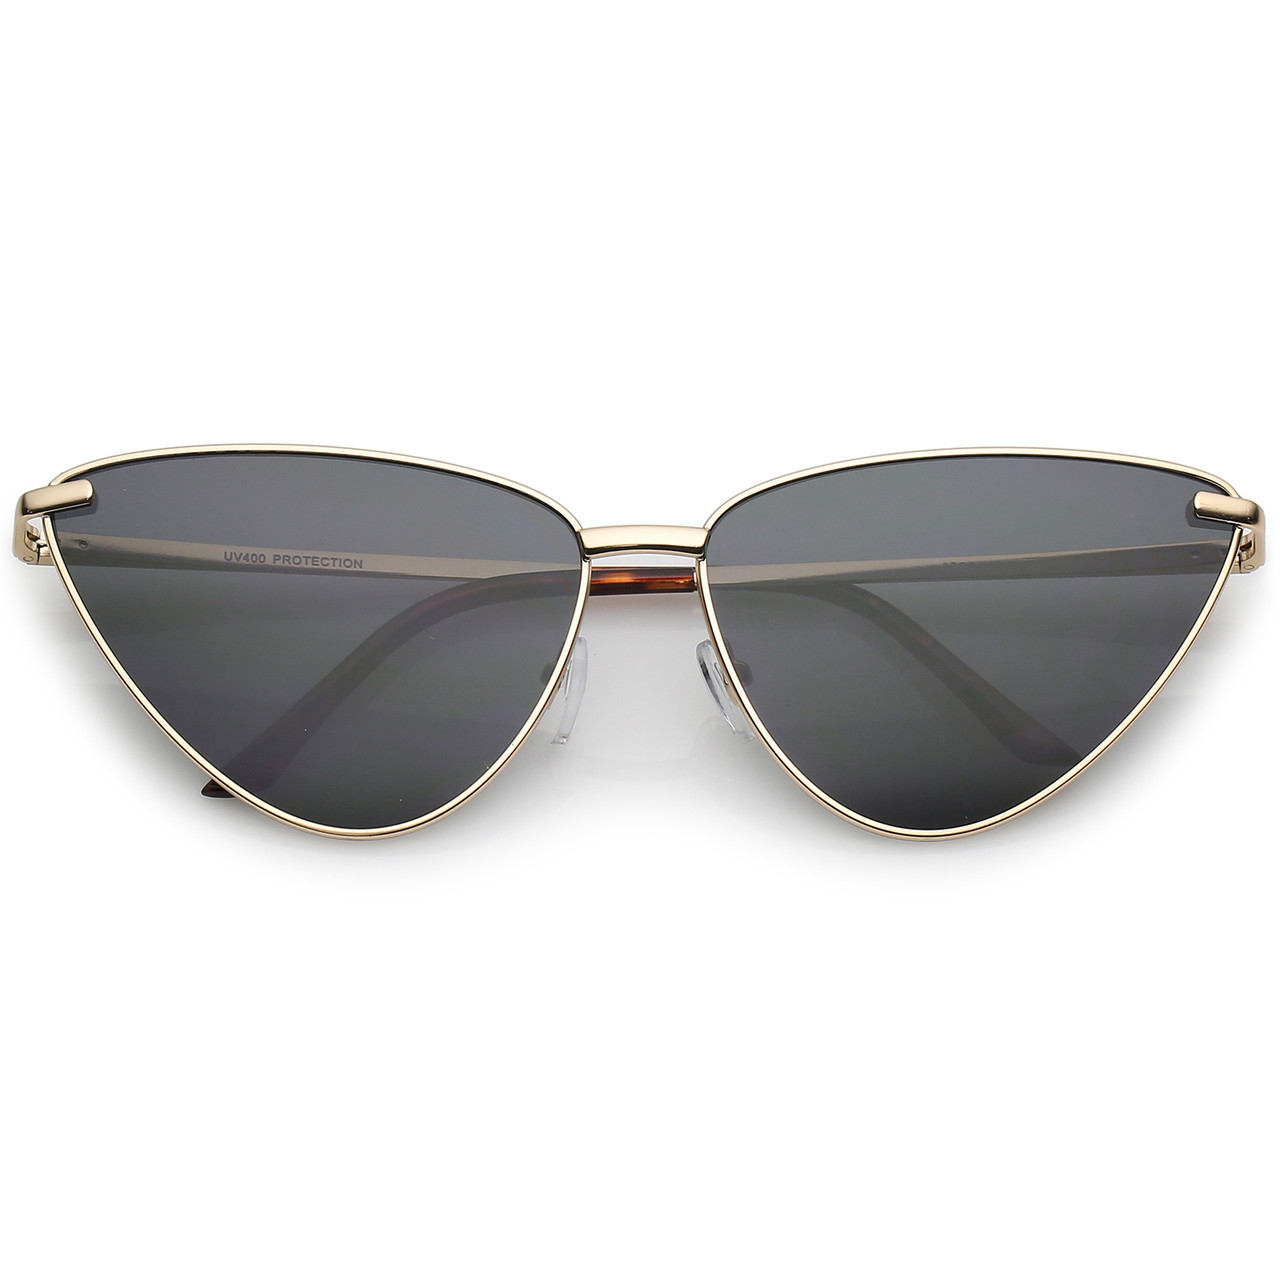 Slim metal cat eye sunglasses with gold frame and pink lenses – Hot Futures